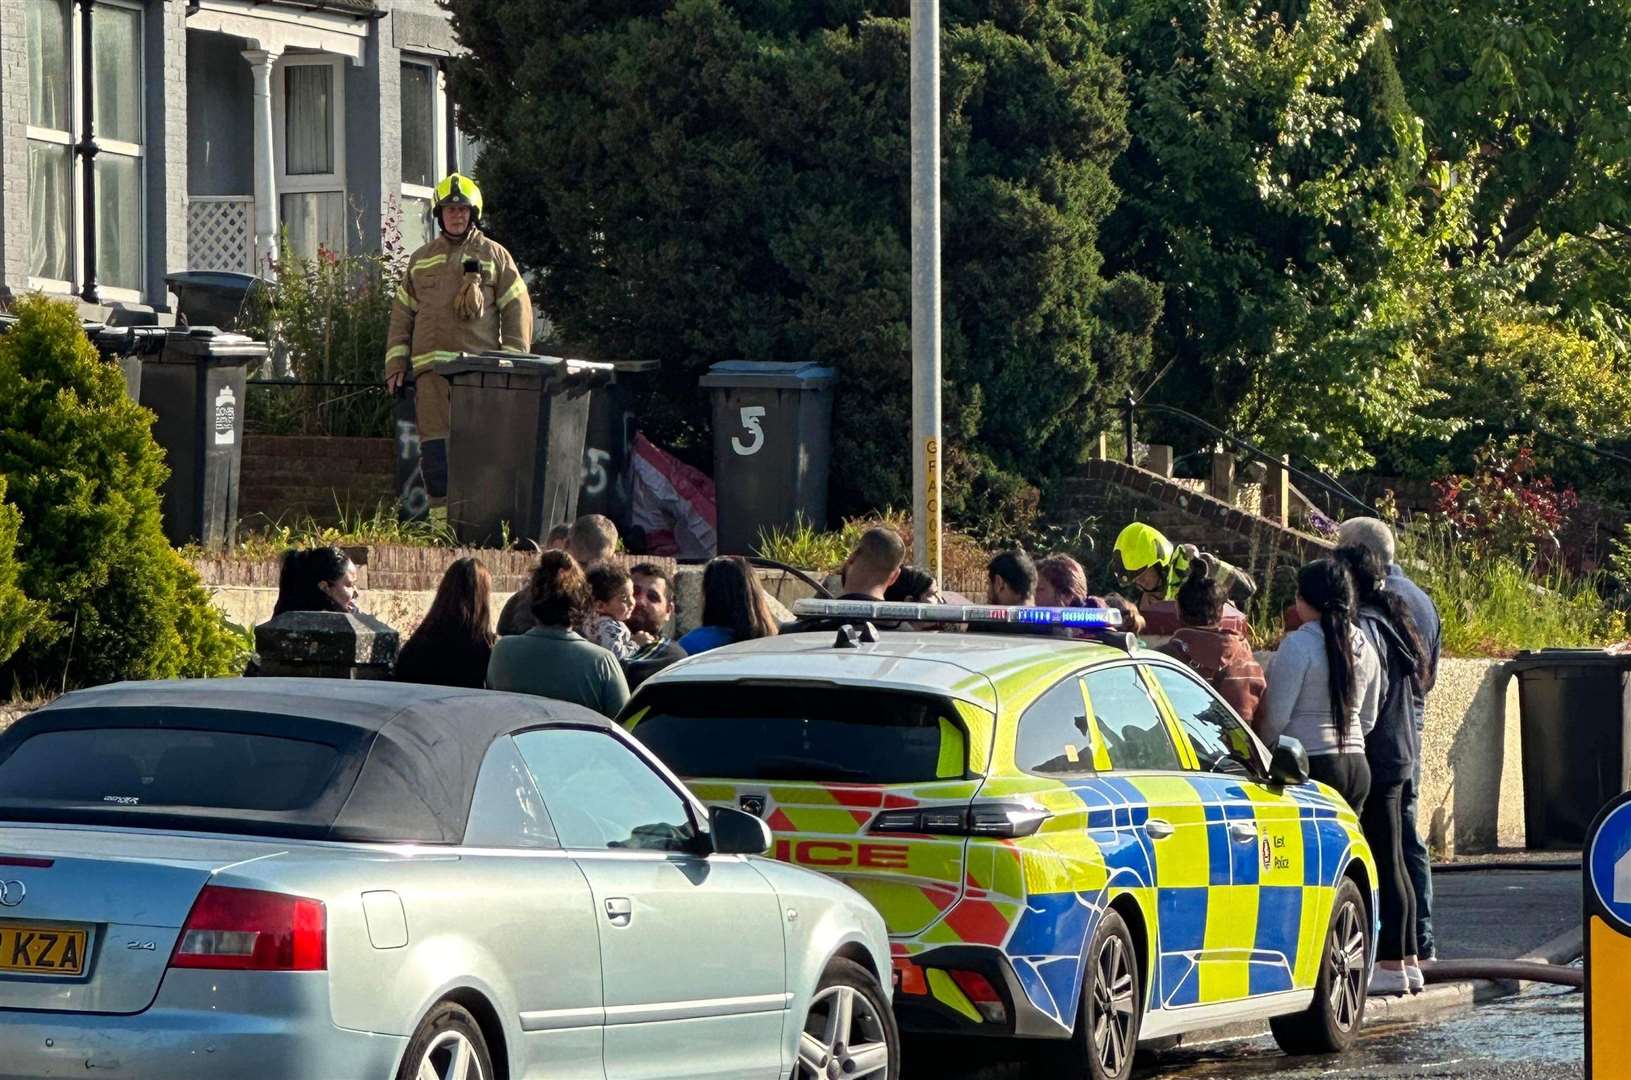 Police have also been pictured at the scene. Picture: David Joseph Wright